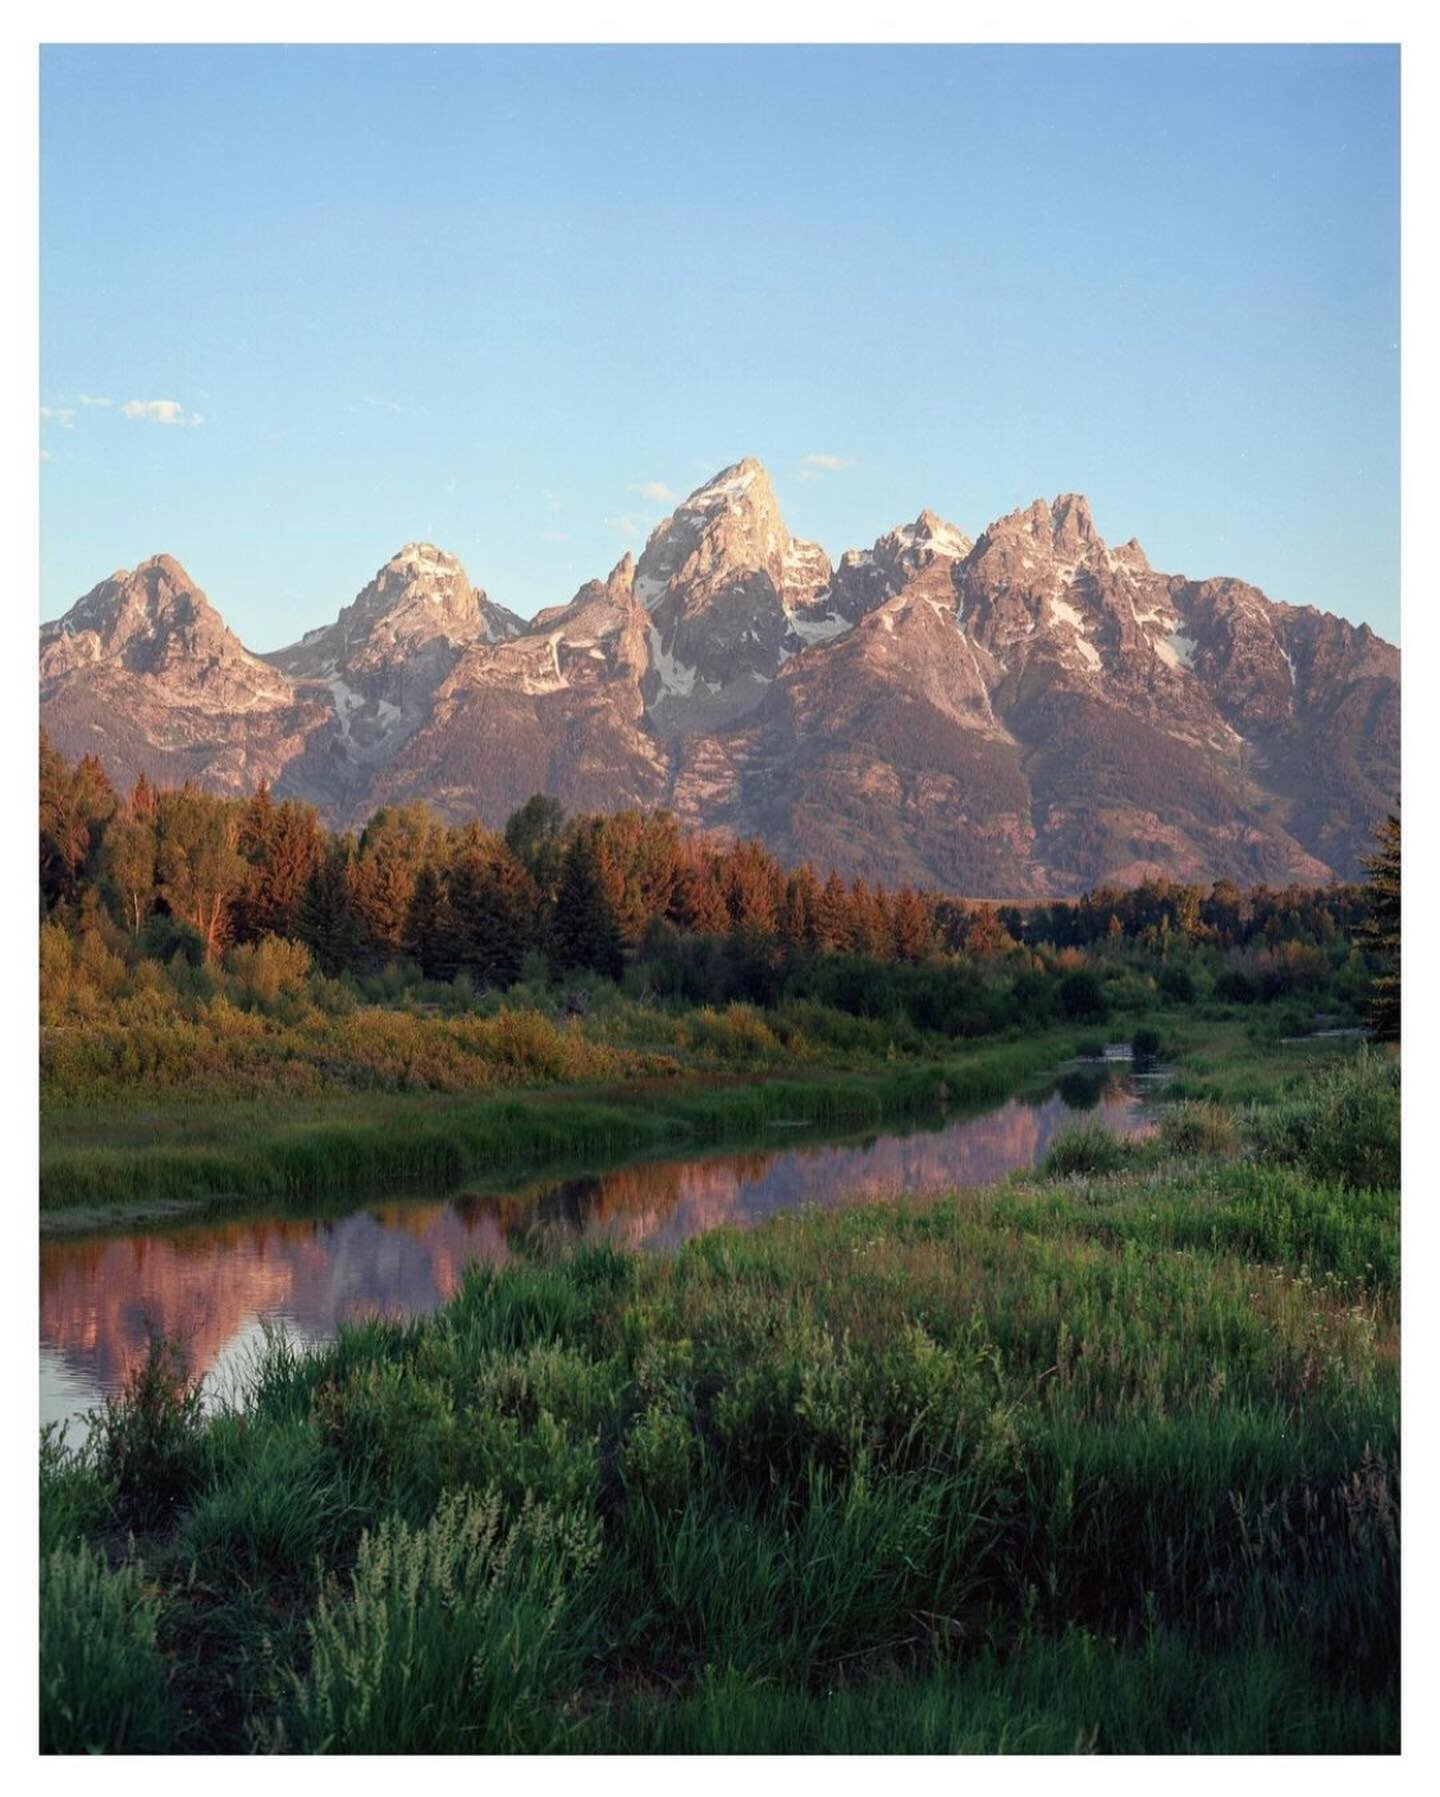 🎞 artist 🎞 @film.lane 

➤ tag us or use #y35mag to be featured 
➤ chosen by: @robertvonthaden

Ethan&rsquo;s ability to capture the Tetons with his own style is unmatched. and he has to be one of the nicest dudes i&rsquo;ve connect with on this app